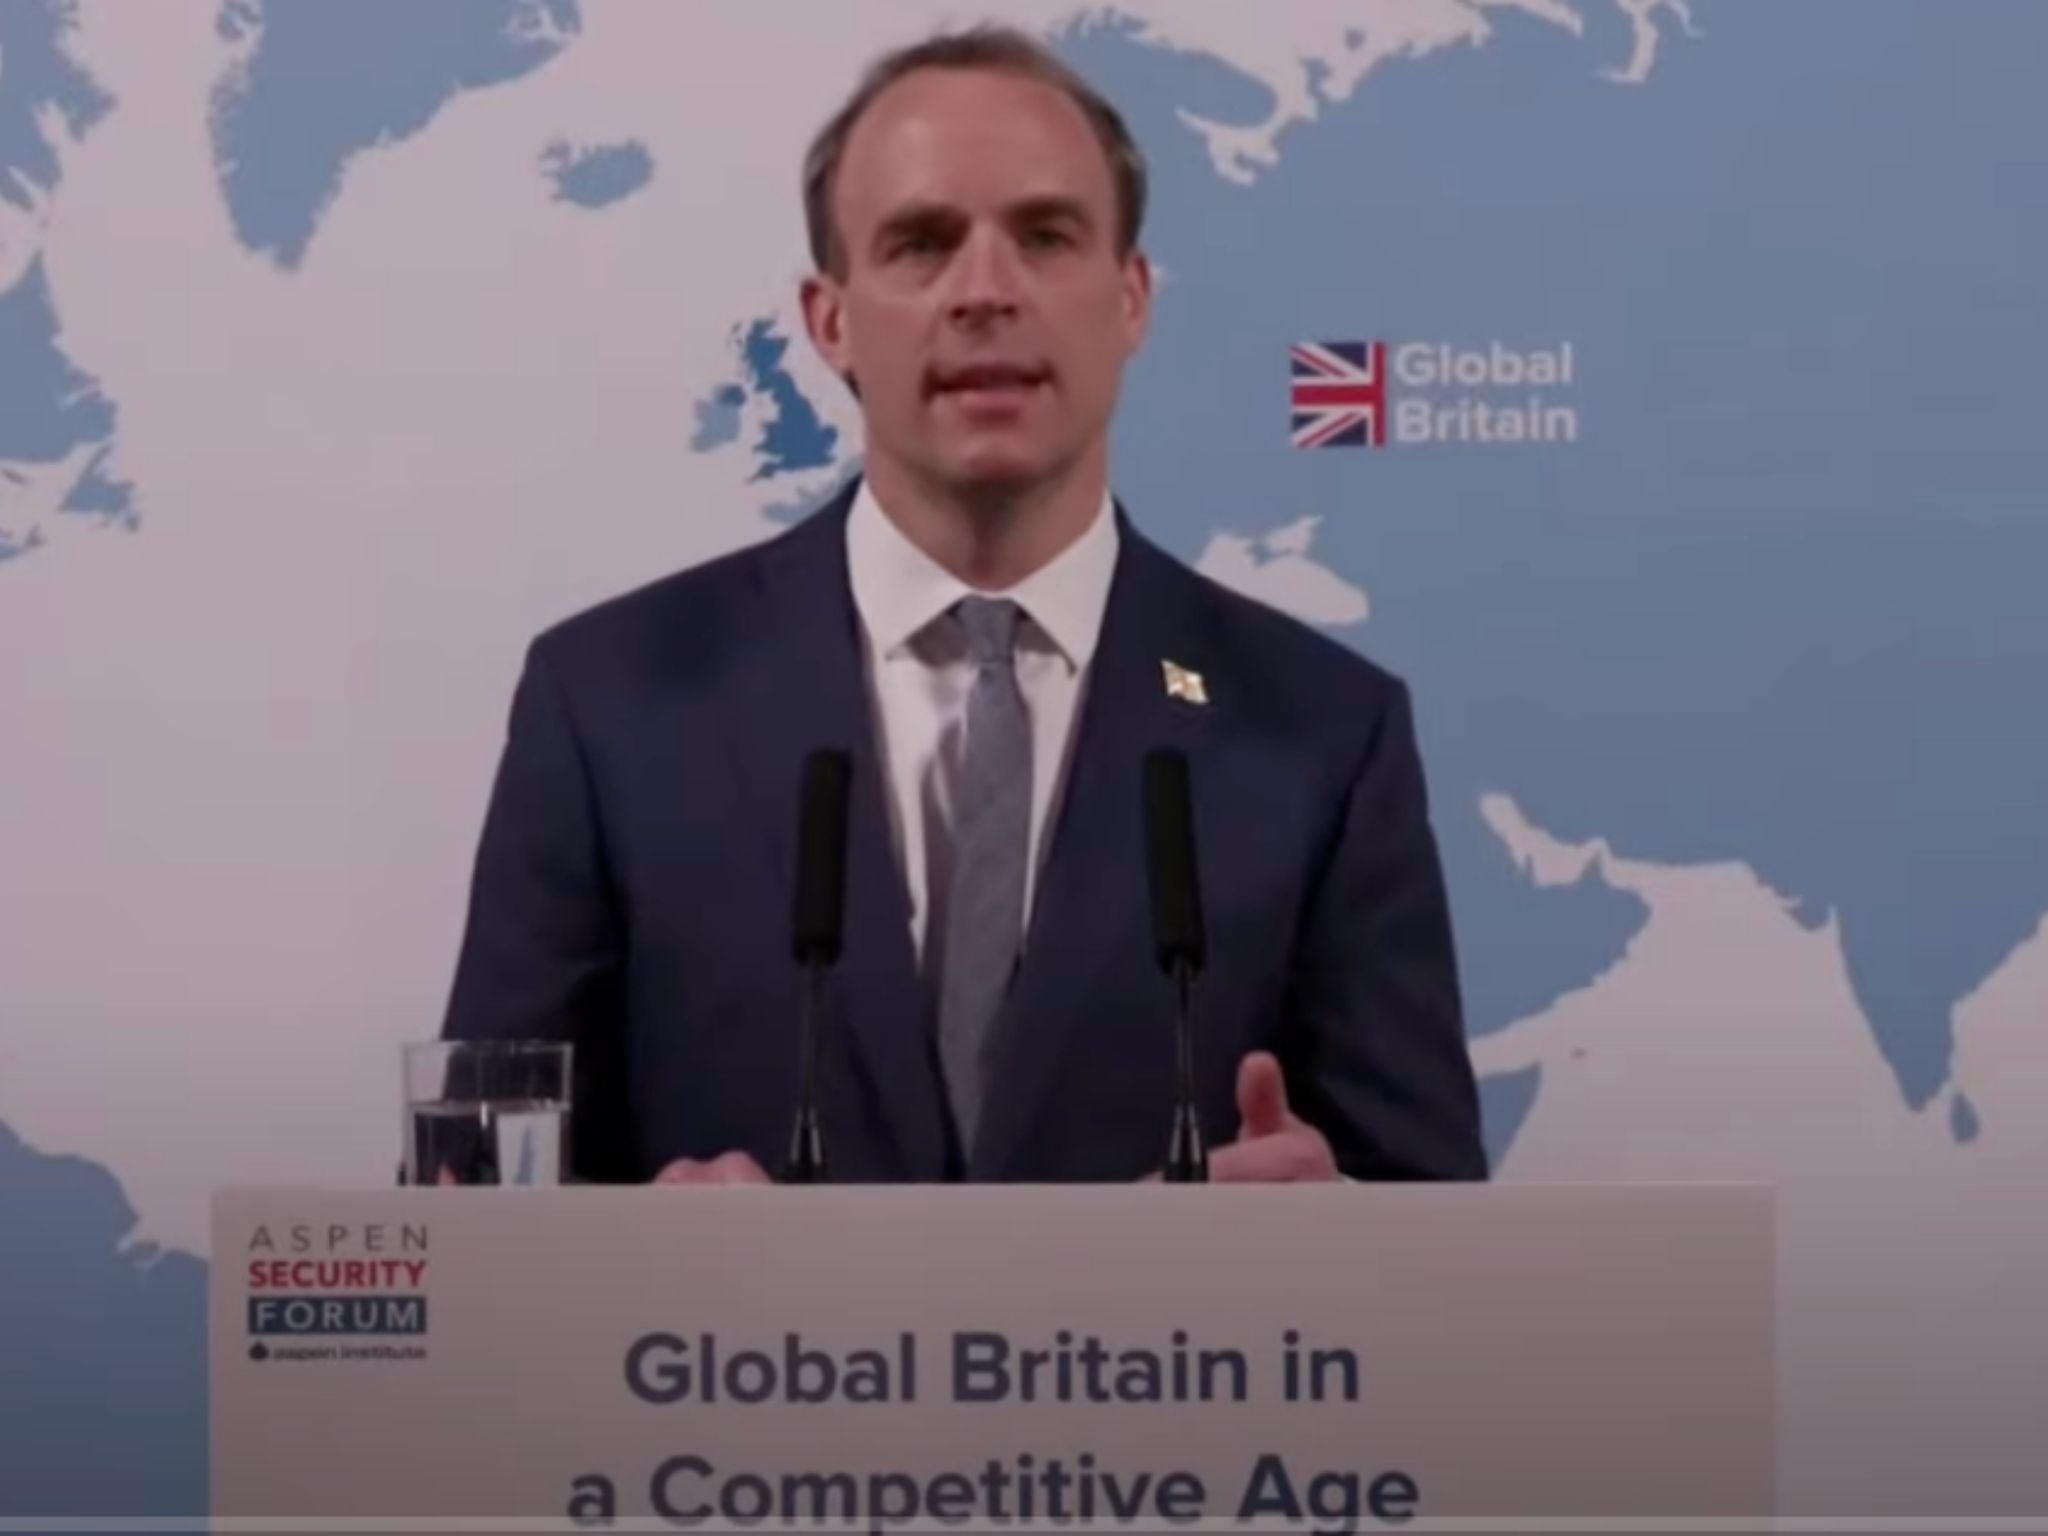 Foreign secretary Dominic Raab gives a speech at the Aspen Security Conference on Wednesday, setting out out how Global Britain will act as a force for good in today’s world